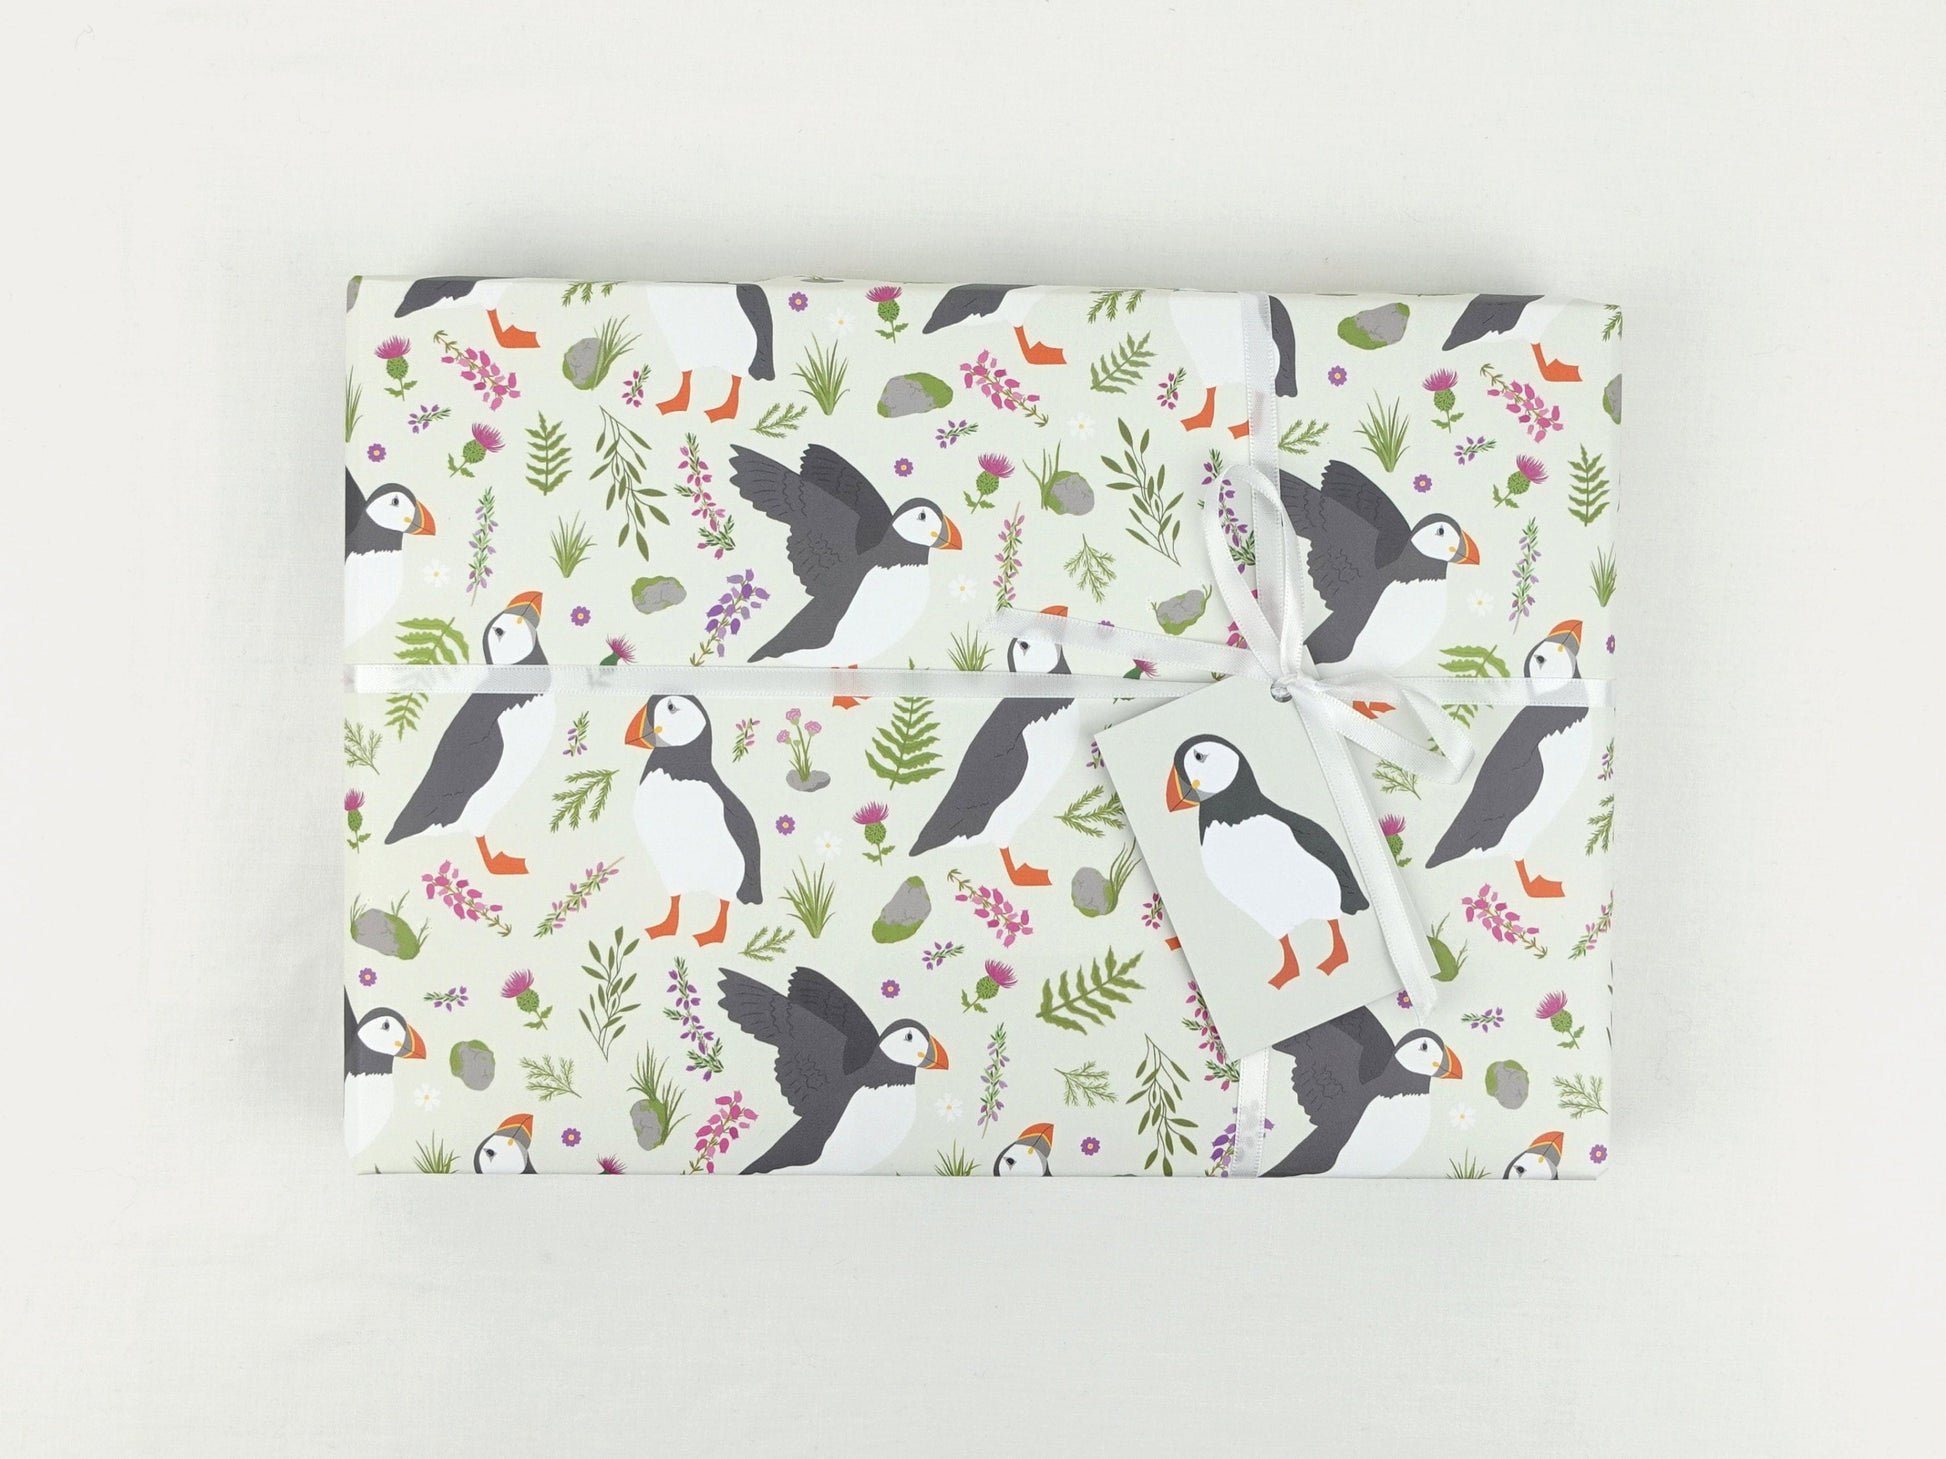 Puffins wrapping paper | Scottish highlands eco friendly gift wrap | Premium quality sheets + Tags | Zero plastic packaging 70x50cm